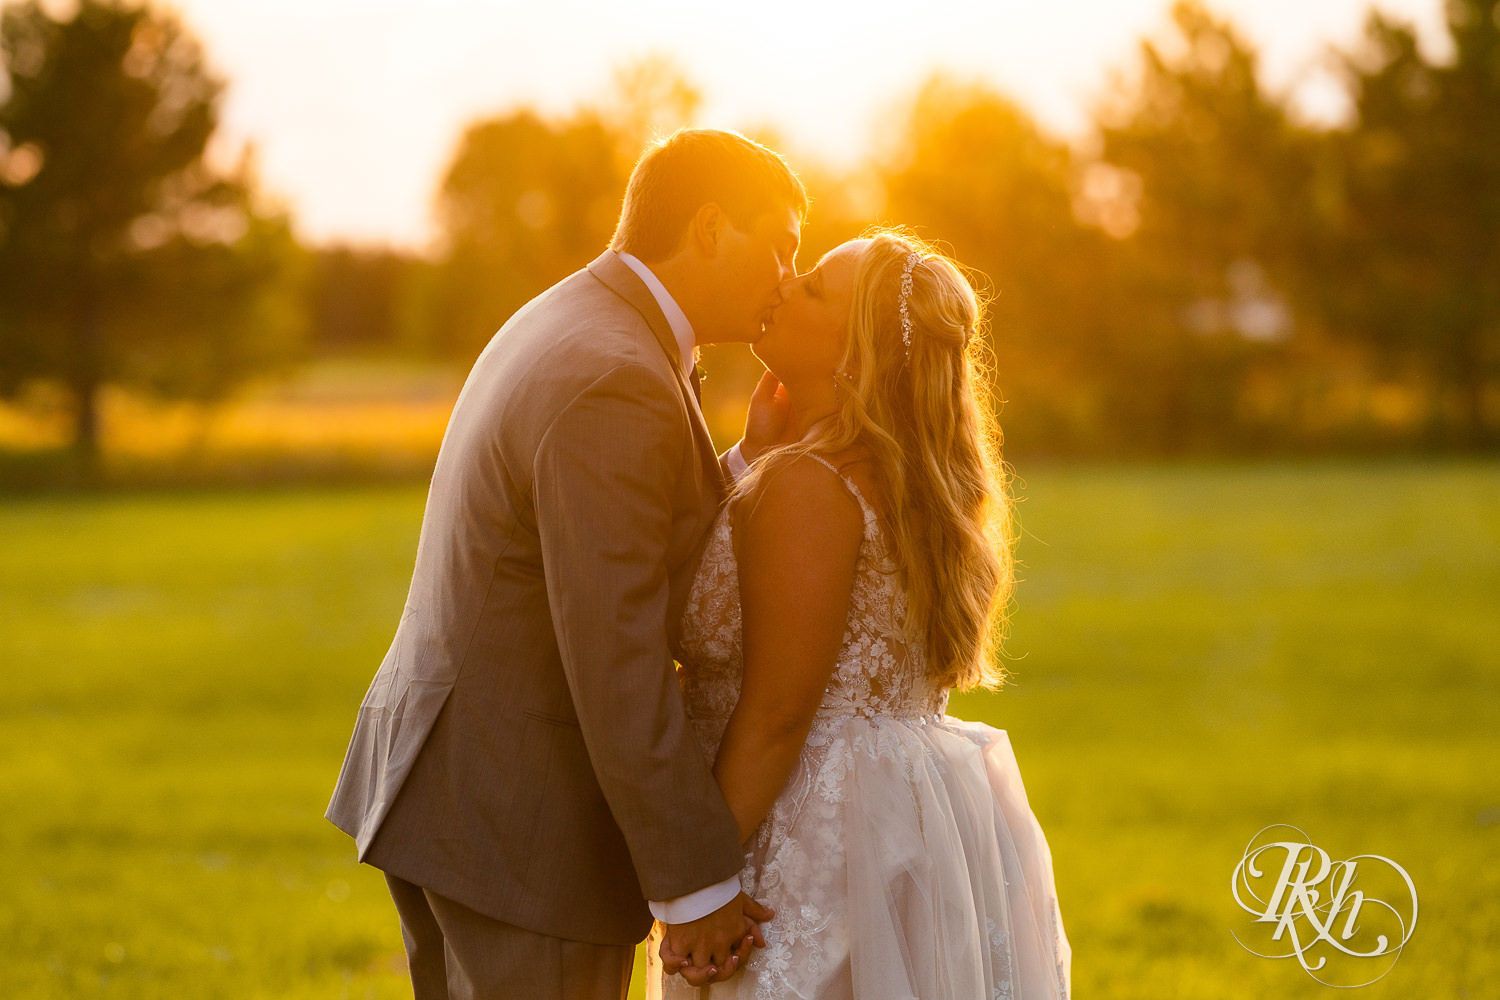 Bride and groom kissing in a field at sunset